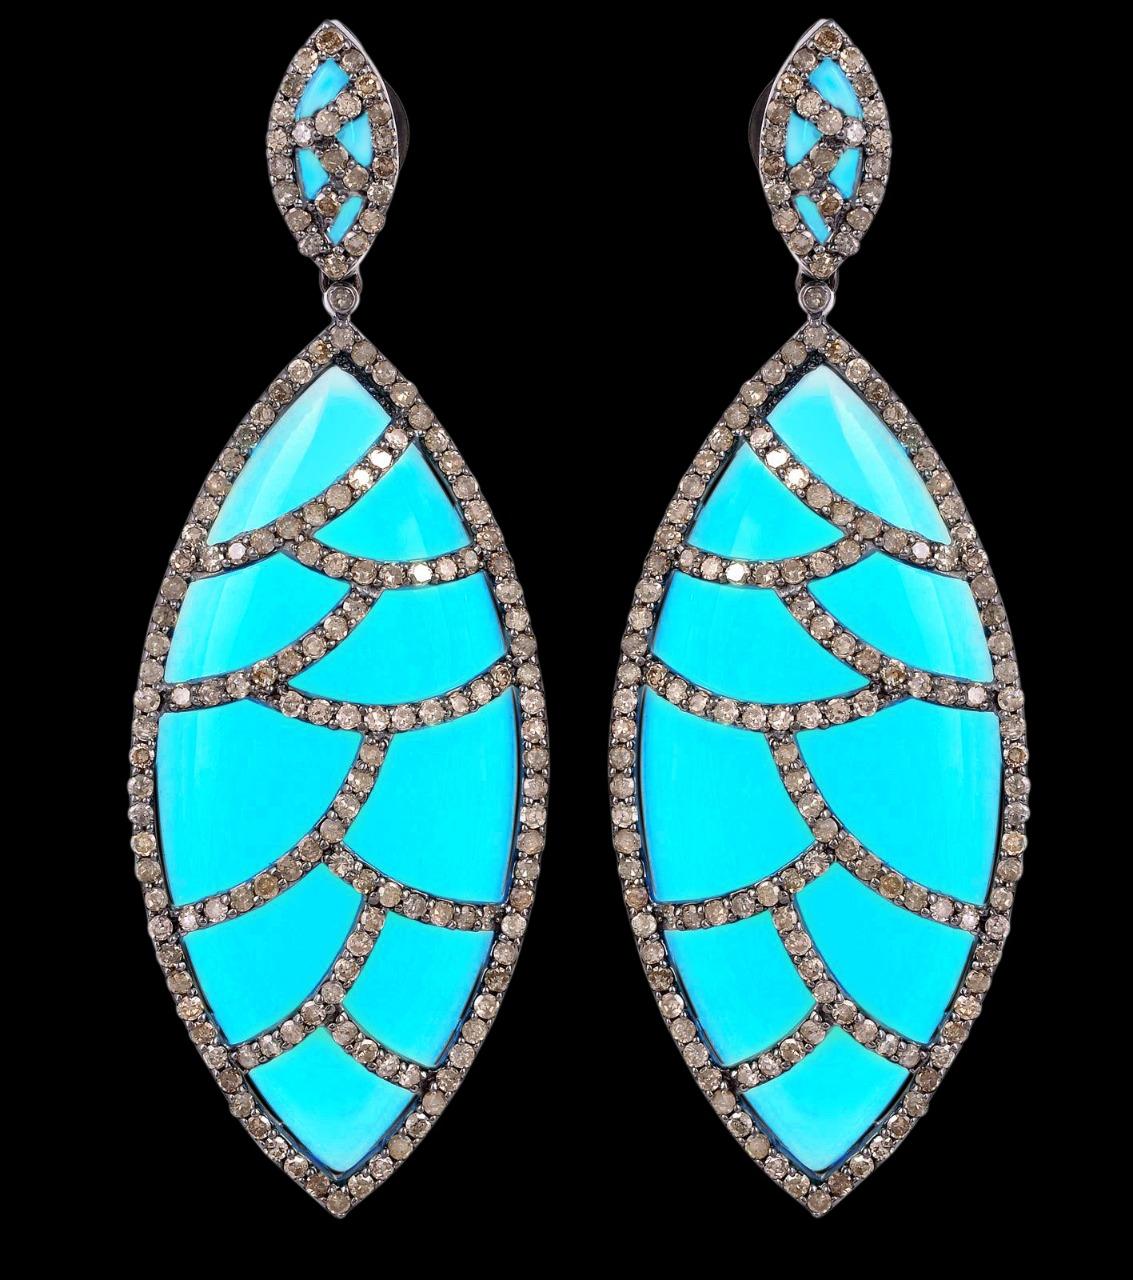 These Bora Bora earrings are cast in 18K gold and sterling silver.  It is hand set in 60.25 carat turquoise and 4.45 carat of sparkling diamonds. Complimentary conversion to clip-on earrings is available.

FOLLOW  MEGHNA JEWELS storefront to view